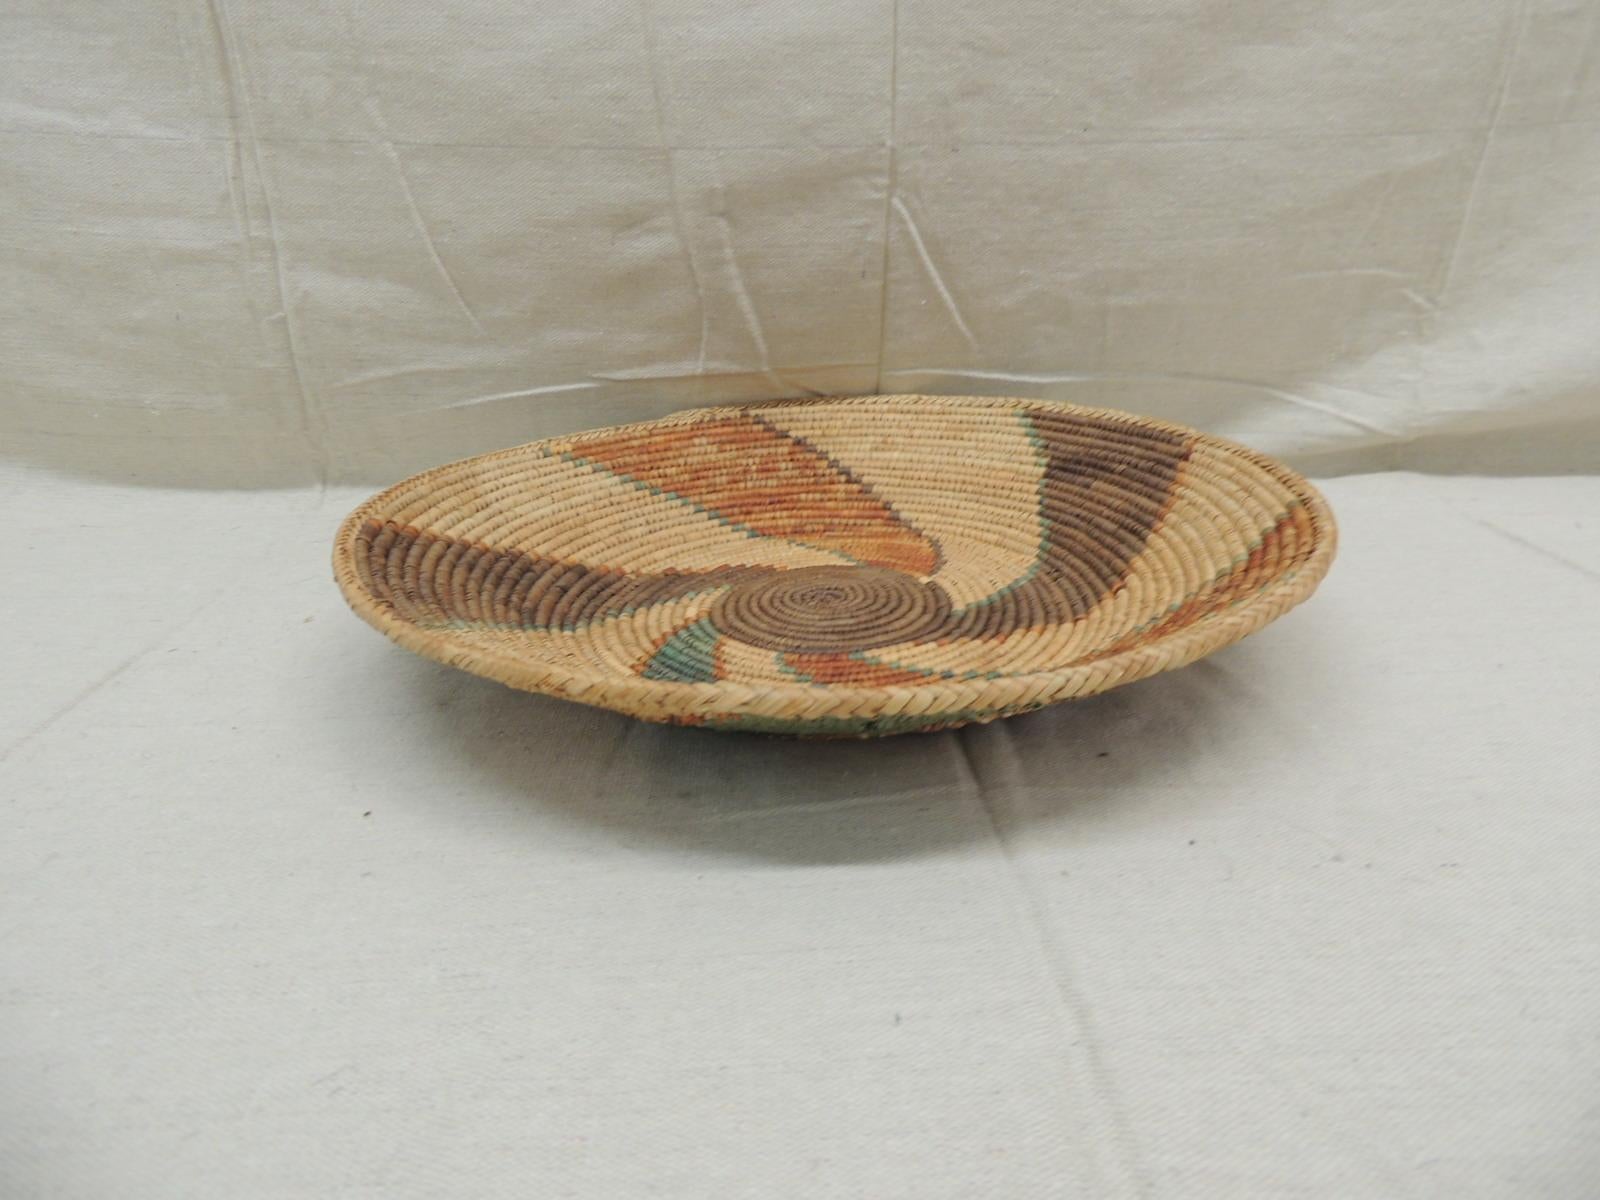 Vintage green and brown coiled decorative round basket
Woven decorative basket with swirl pattern in shades of brown, tan, green, orange and taupe.
Size: 14